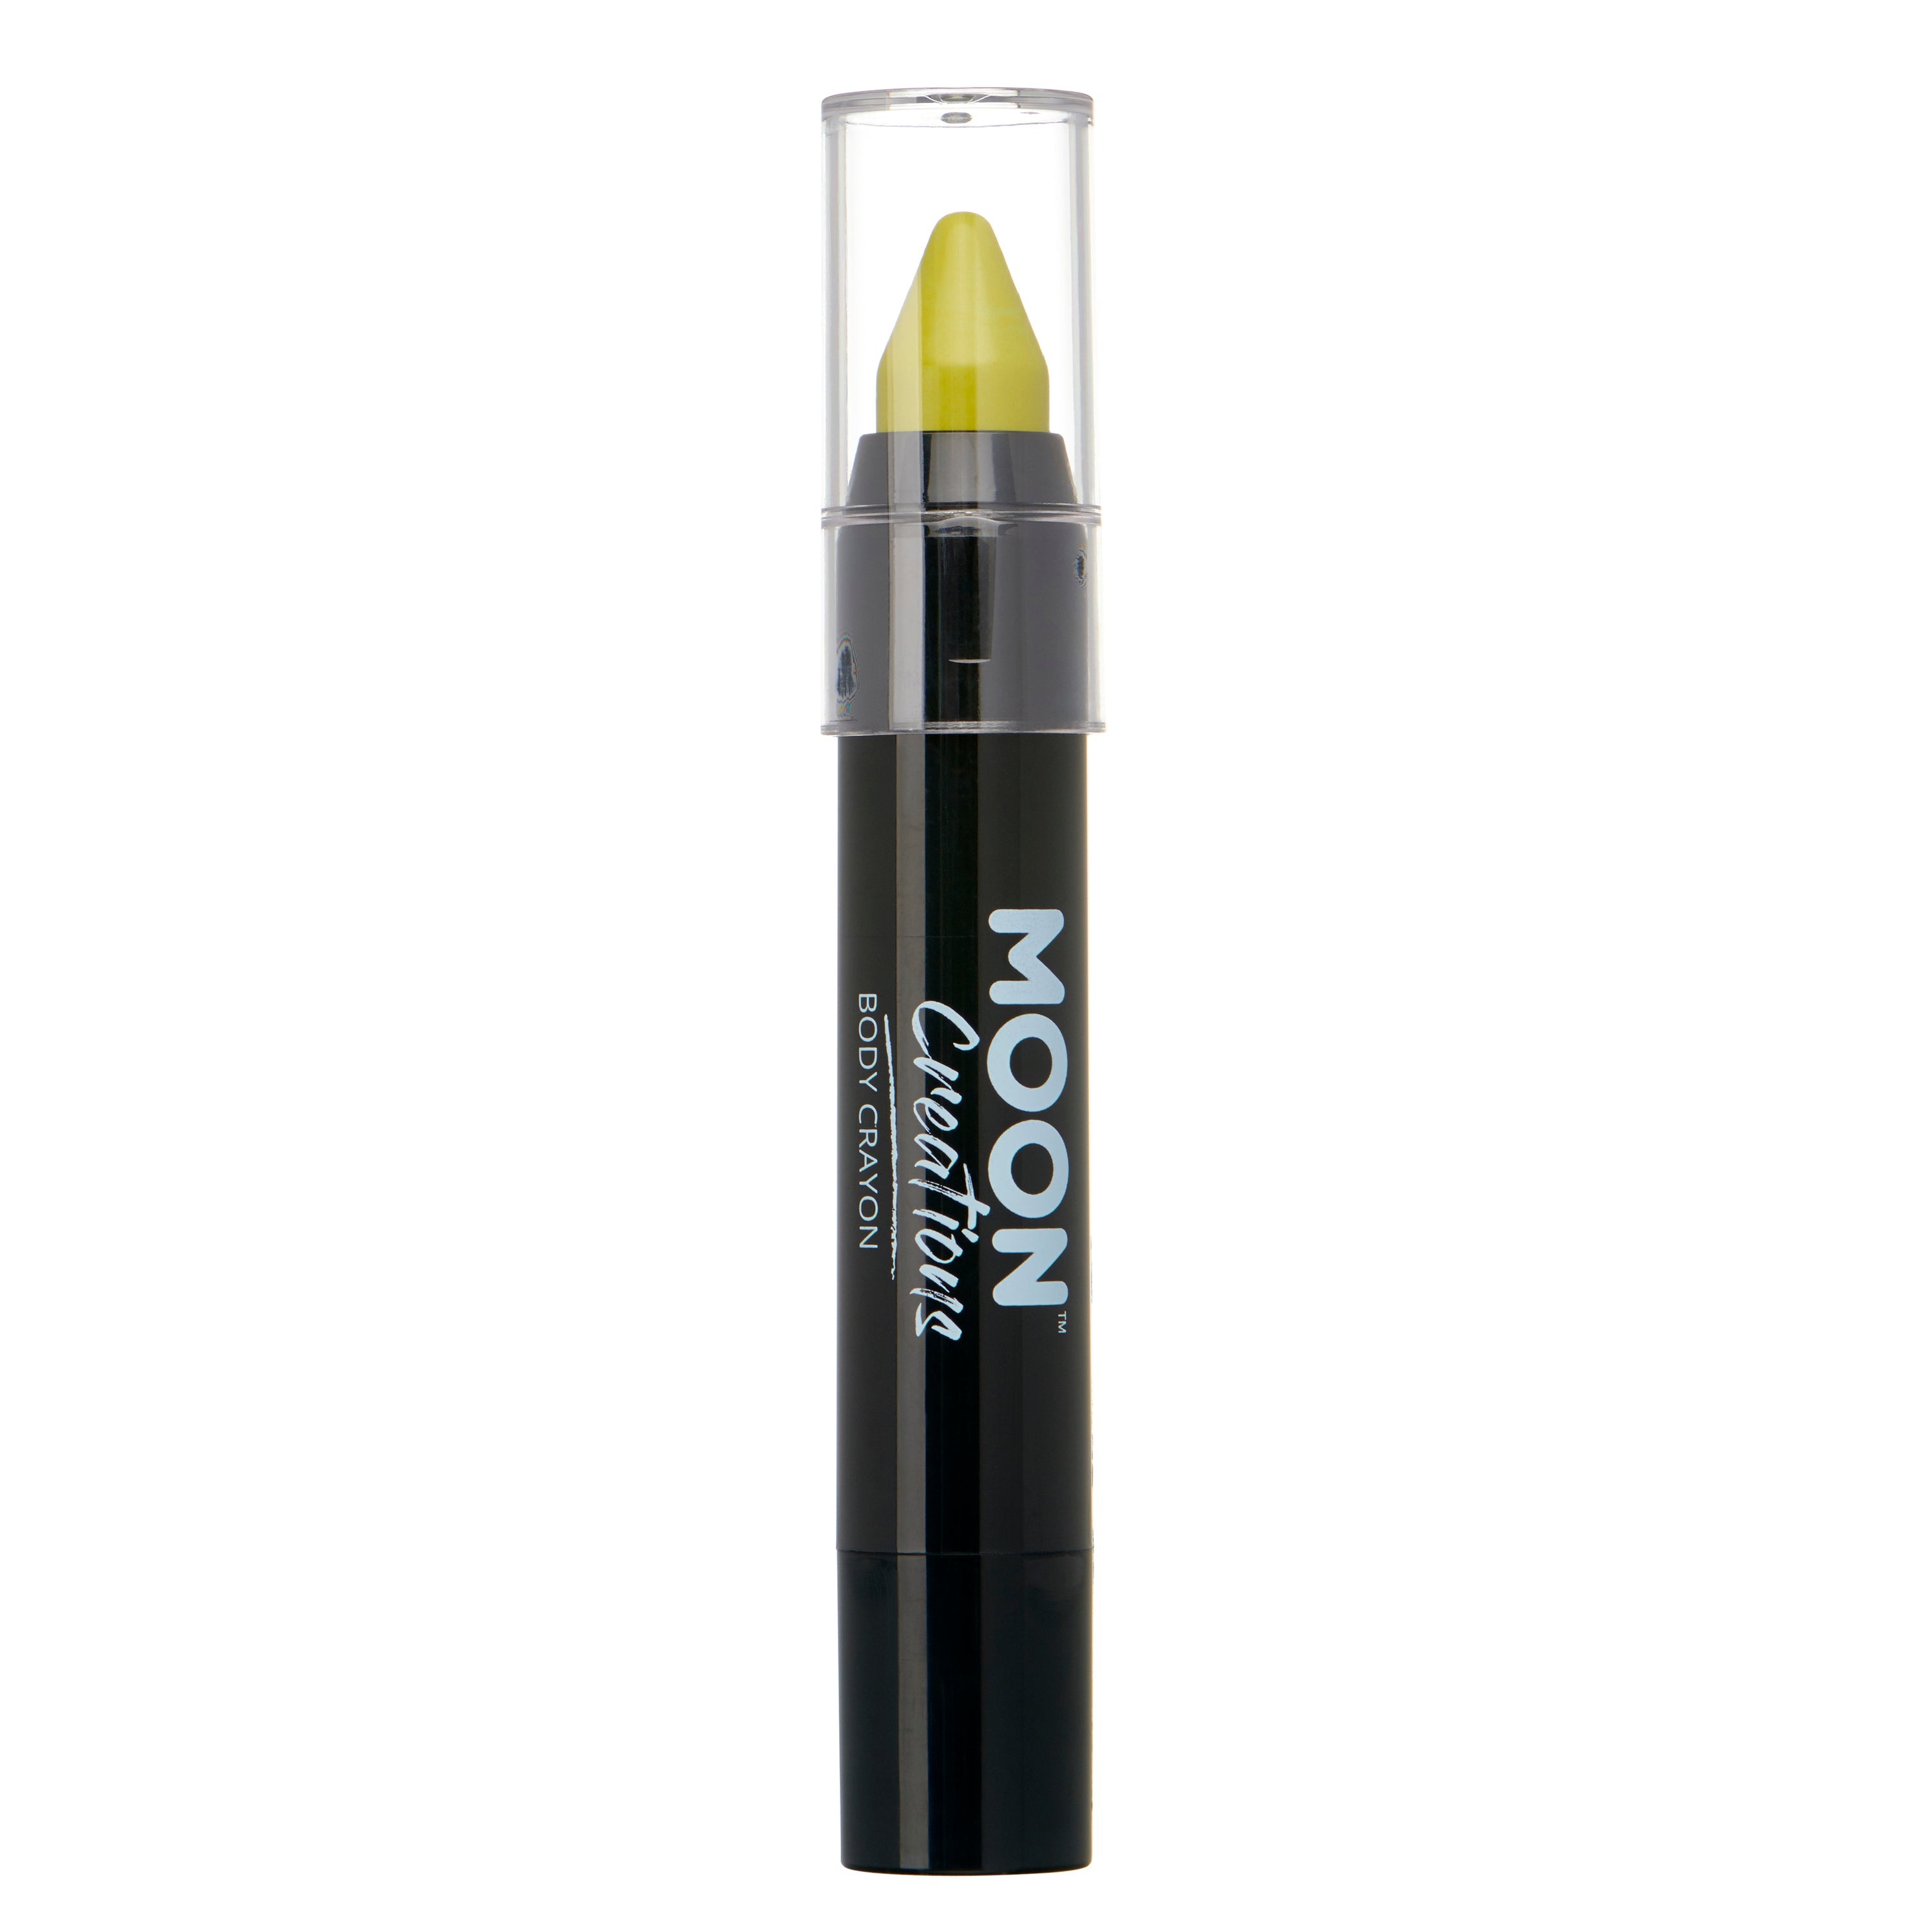 Lime Green - Face & Body Crayon, 3.5g. Cosmetically certified, FDA & Health Canada compliant and cruelty free.